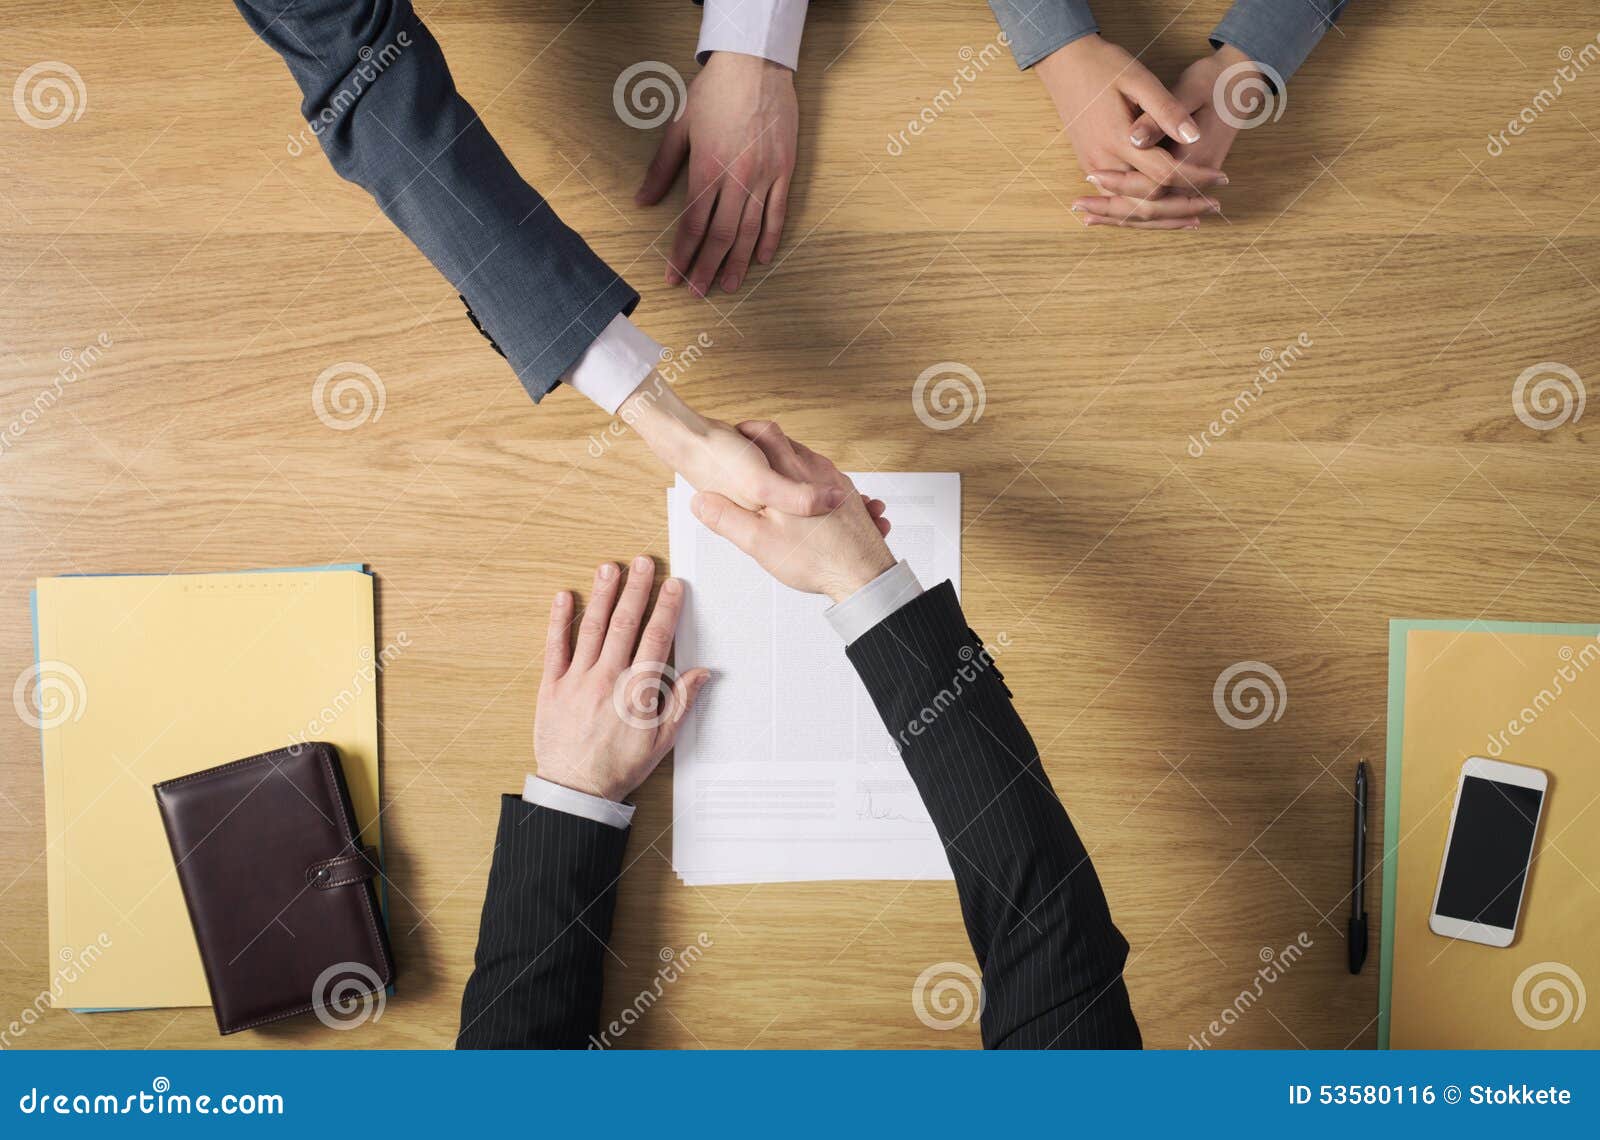 business people handshaking after signing an agreement